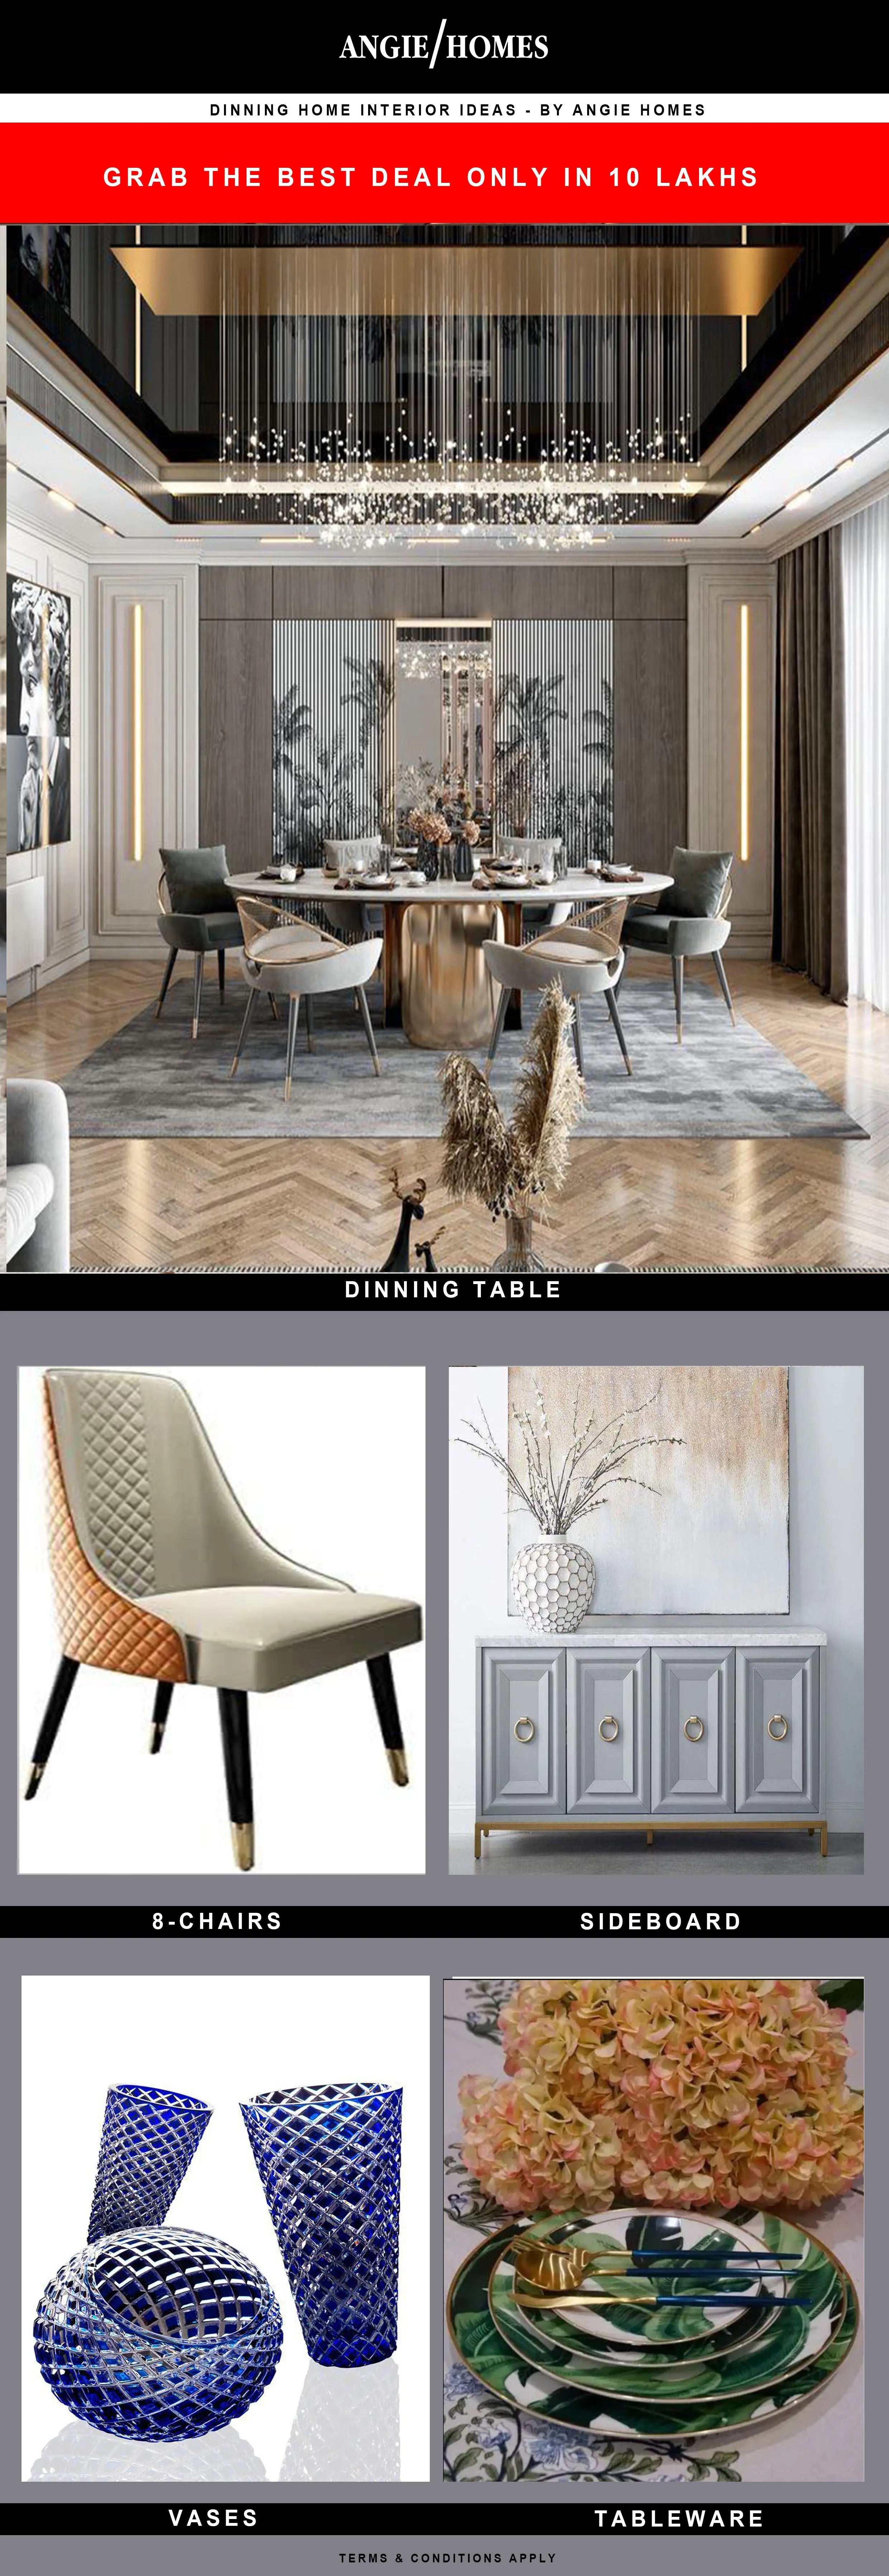 Sandra Dining Room Design for Your Home